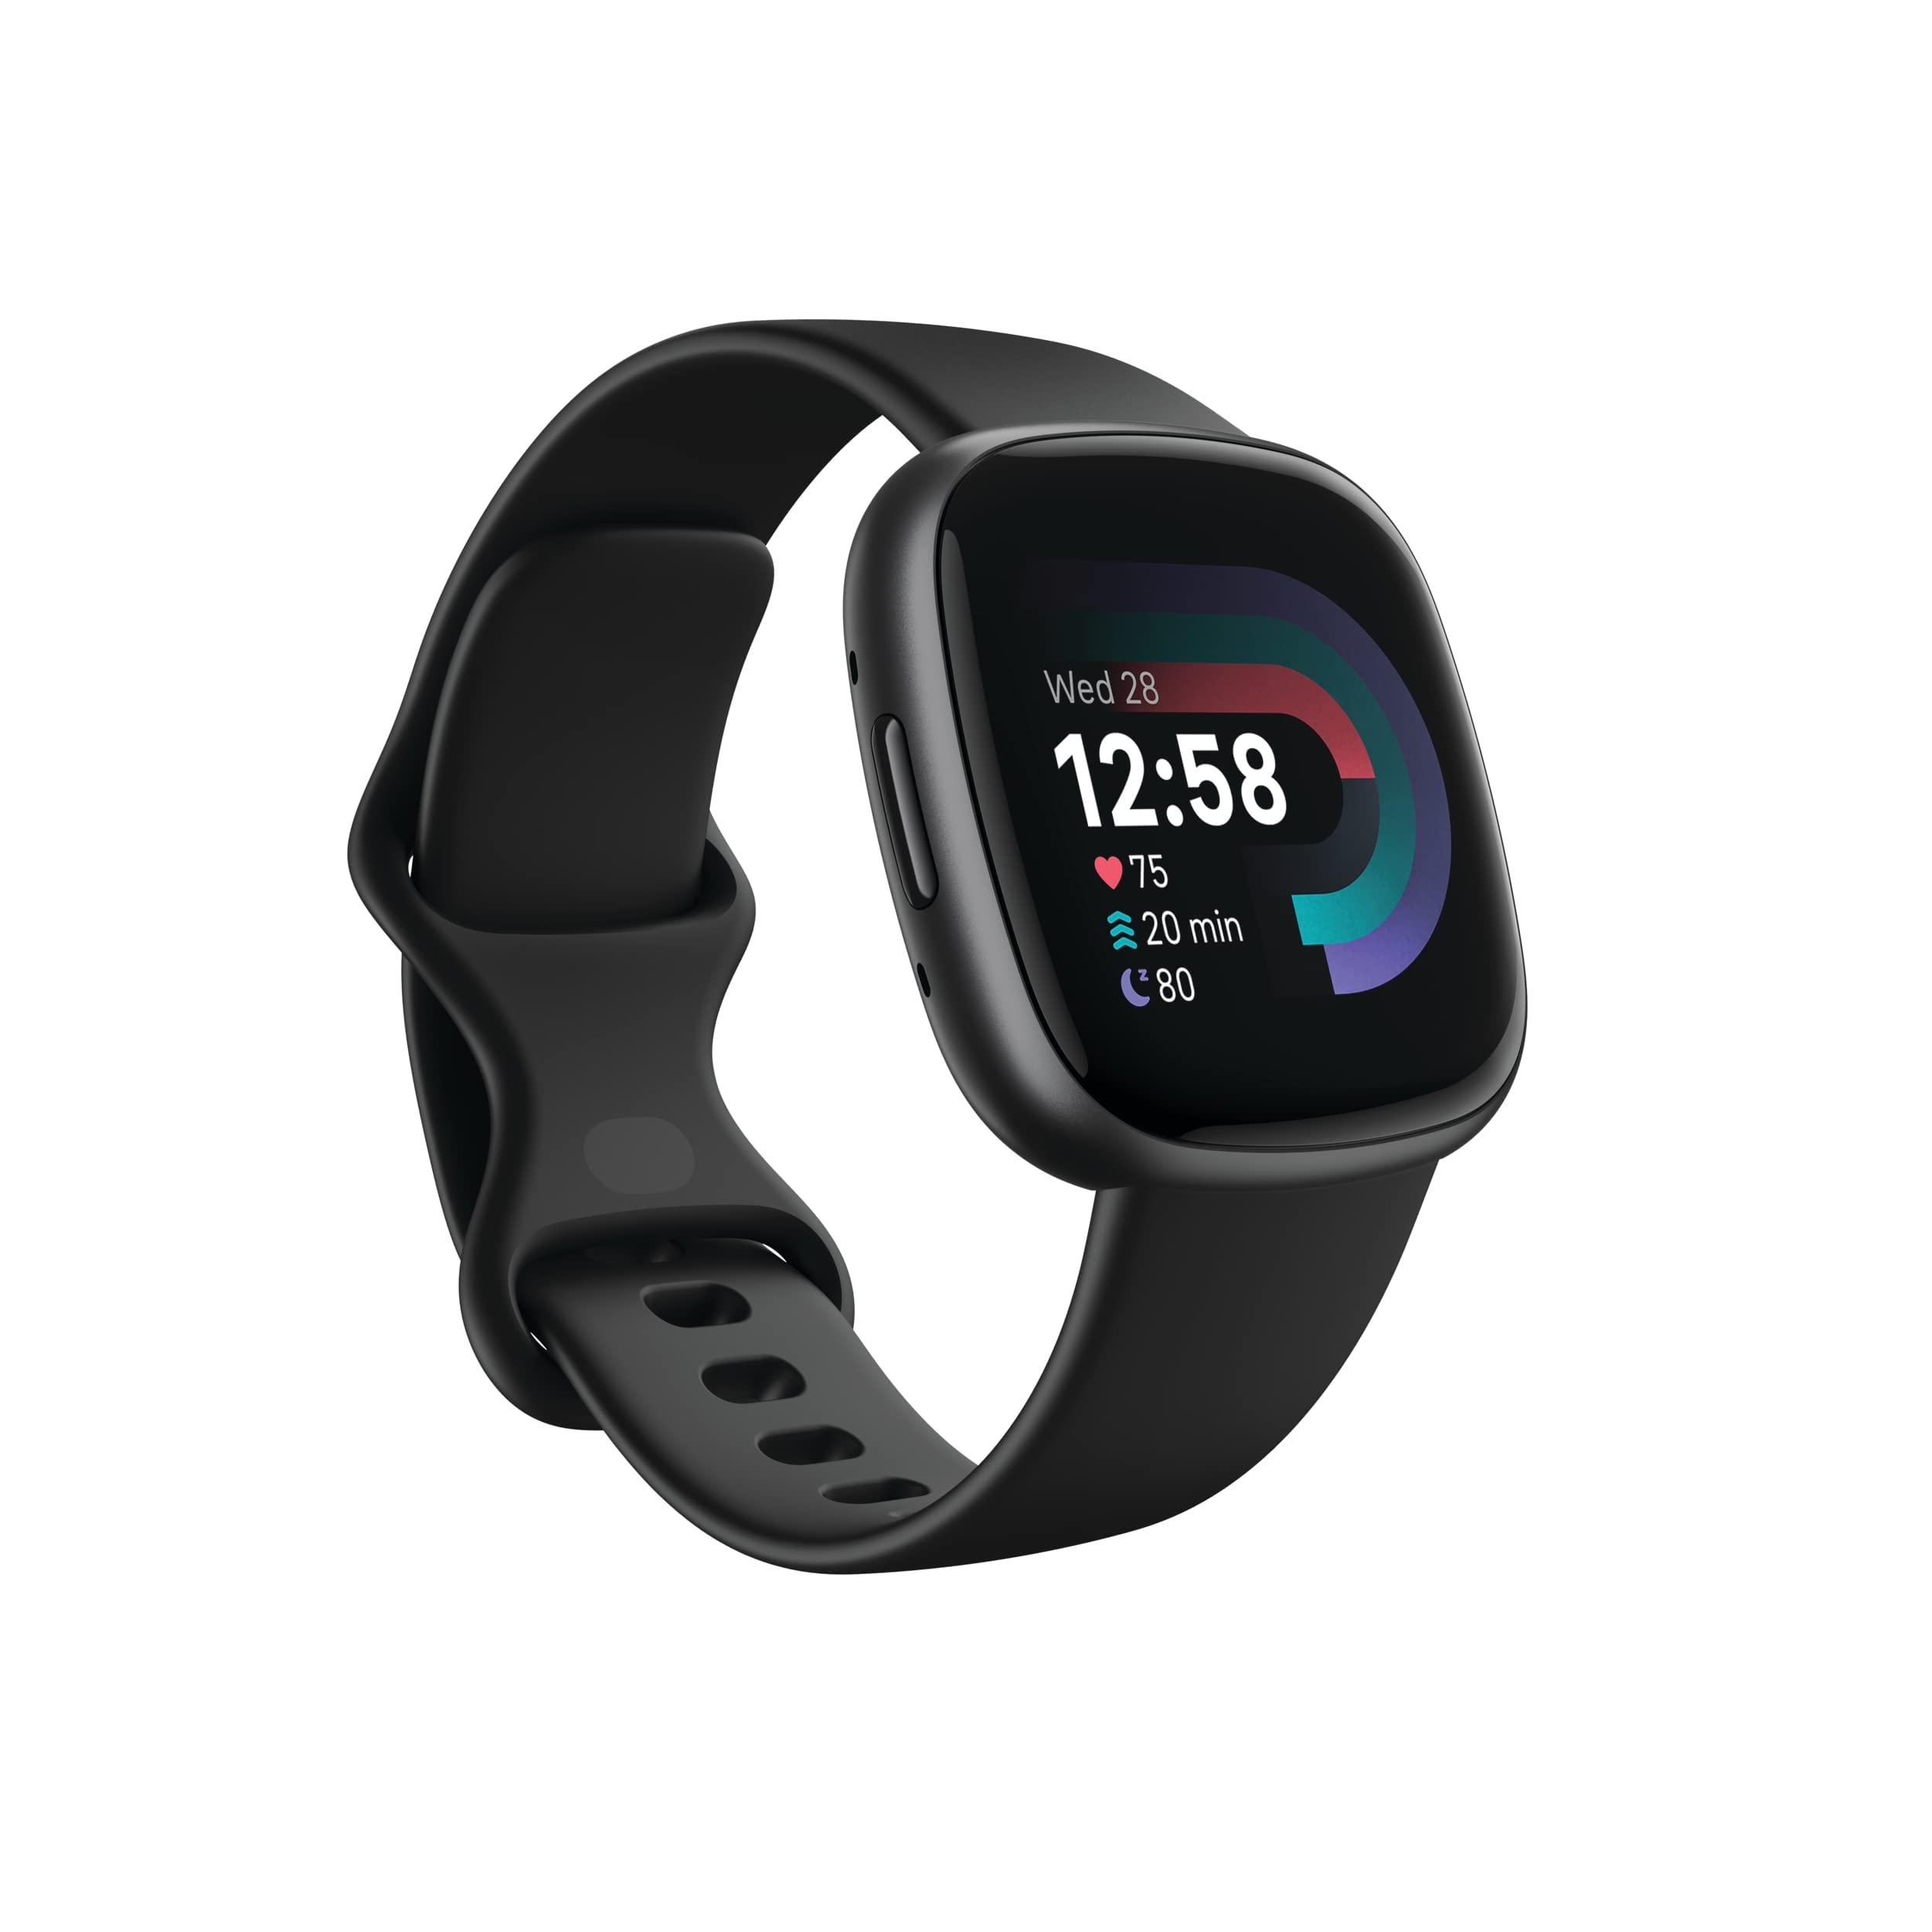 Fitbit Versa 4 Fitness Smartwatch with Daily Readiness, GPS, 24/7 Heart Rate, 40+ Exercise Modes, Sleep Tracking and more, Black/Graphite, One Size (S & L Bands Included) $122.36